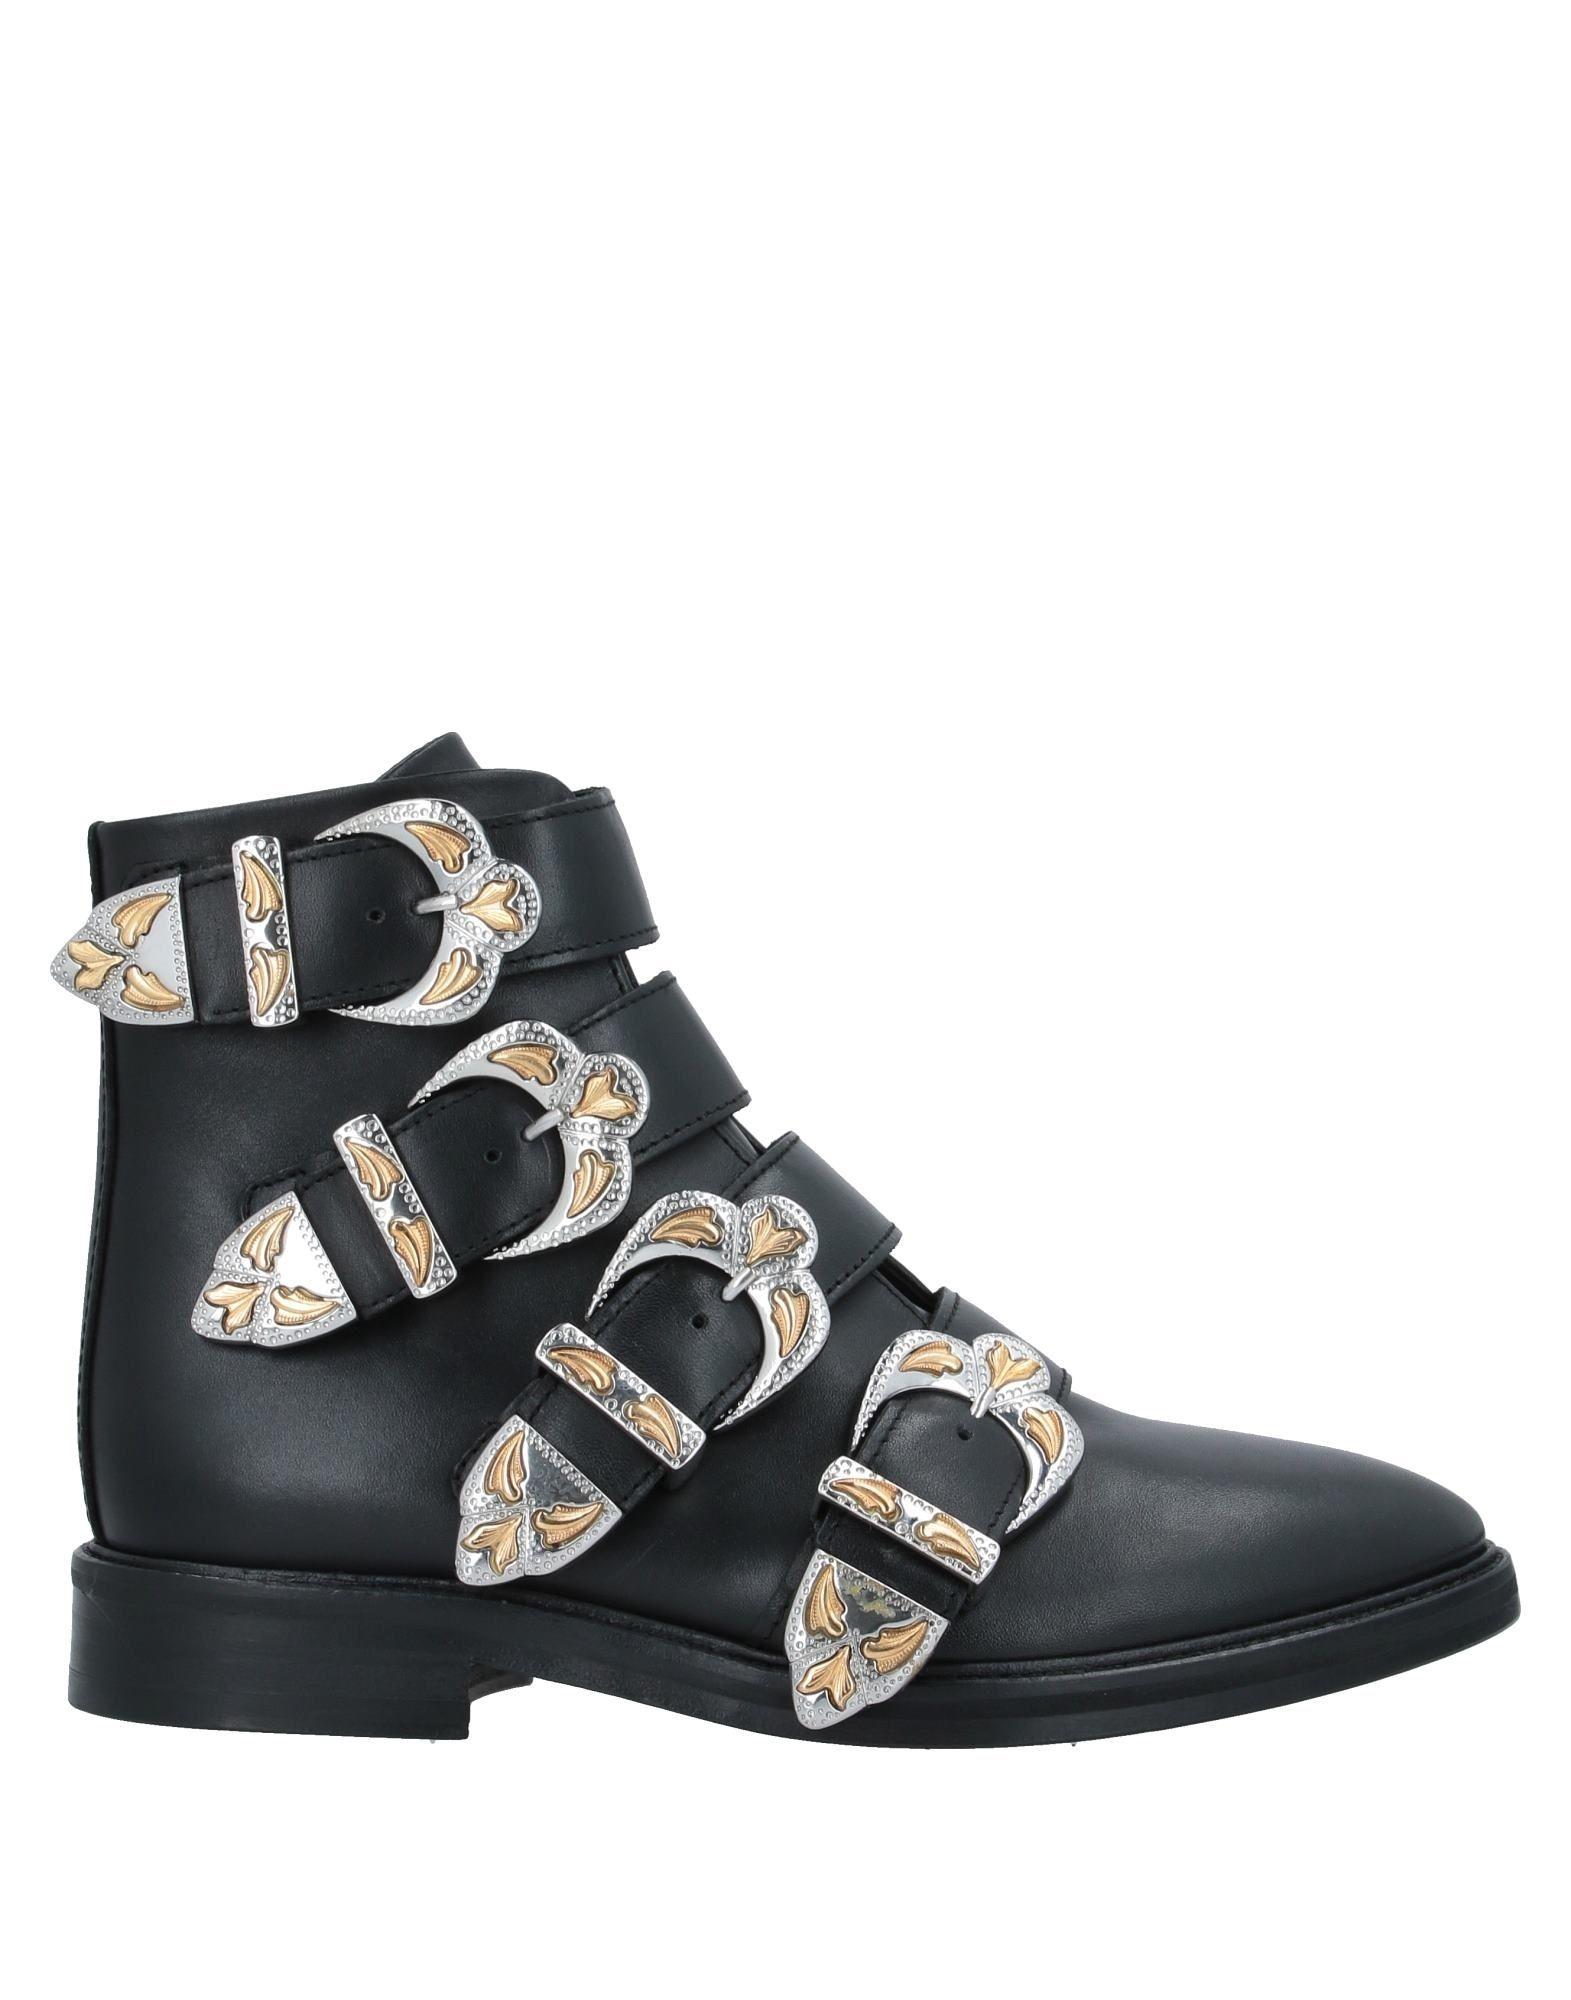 Maje Jackpot Buckled Leather Ankle Boots Black | Lyst